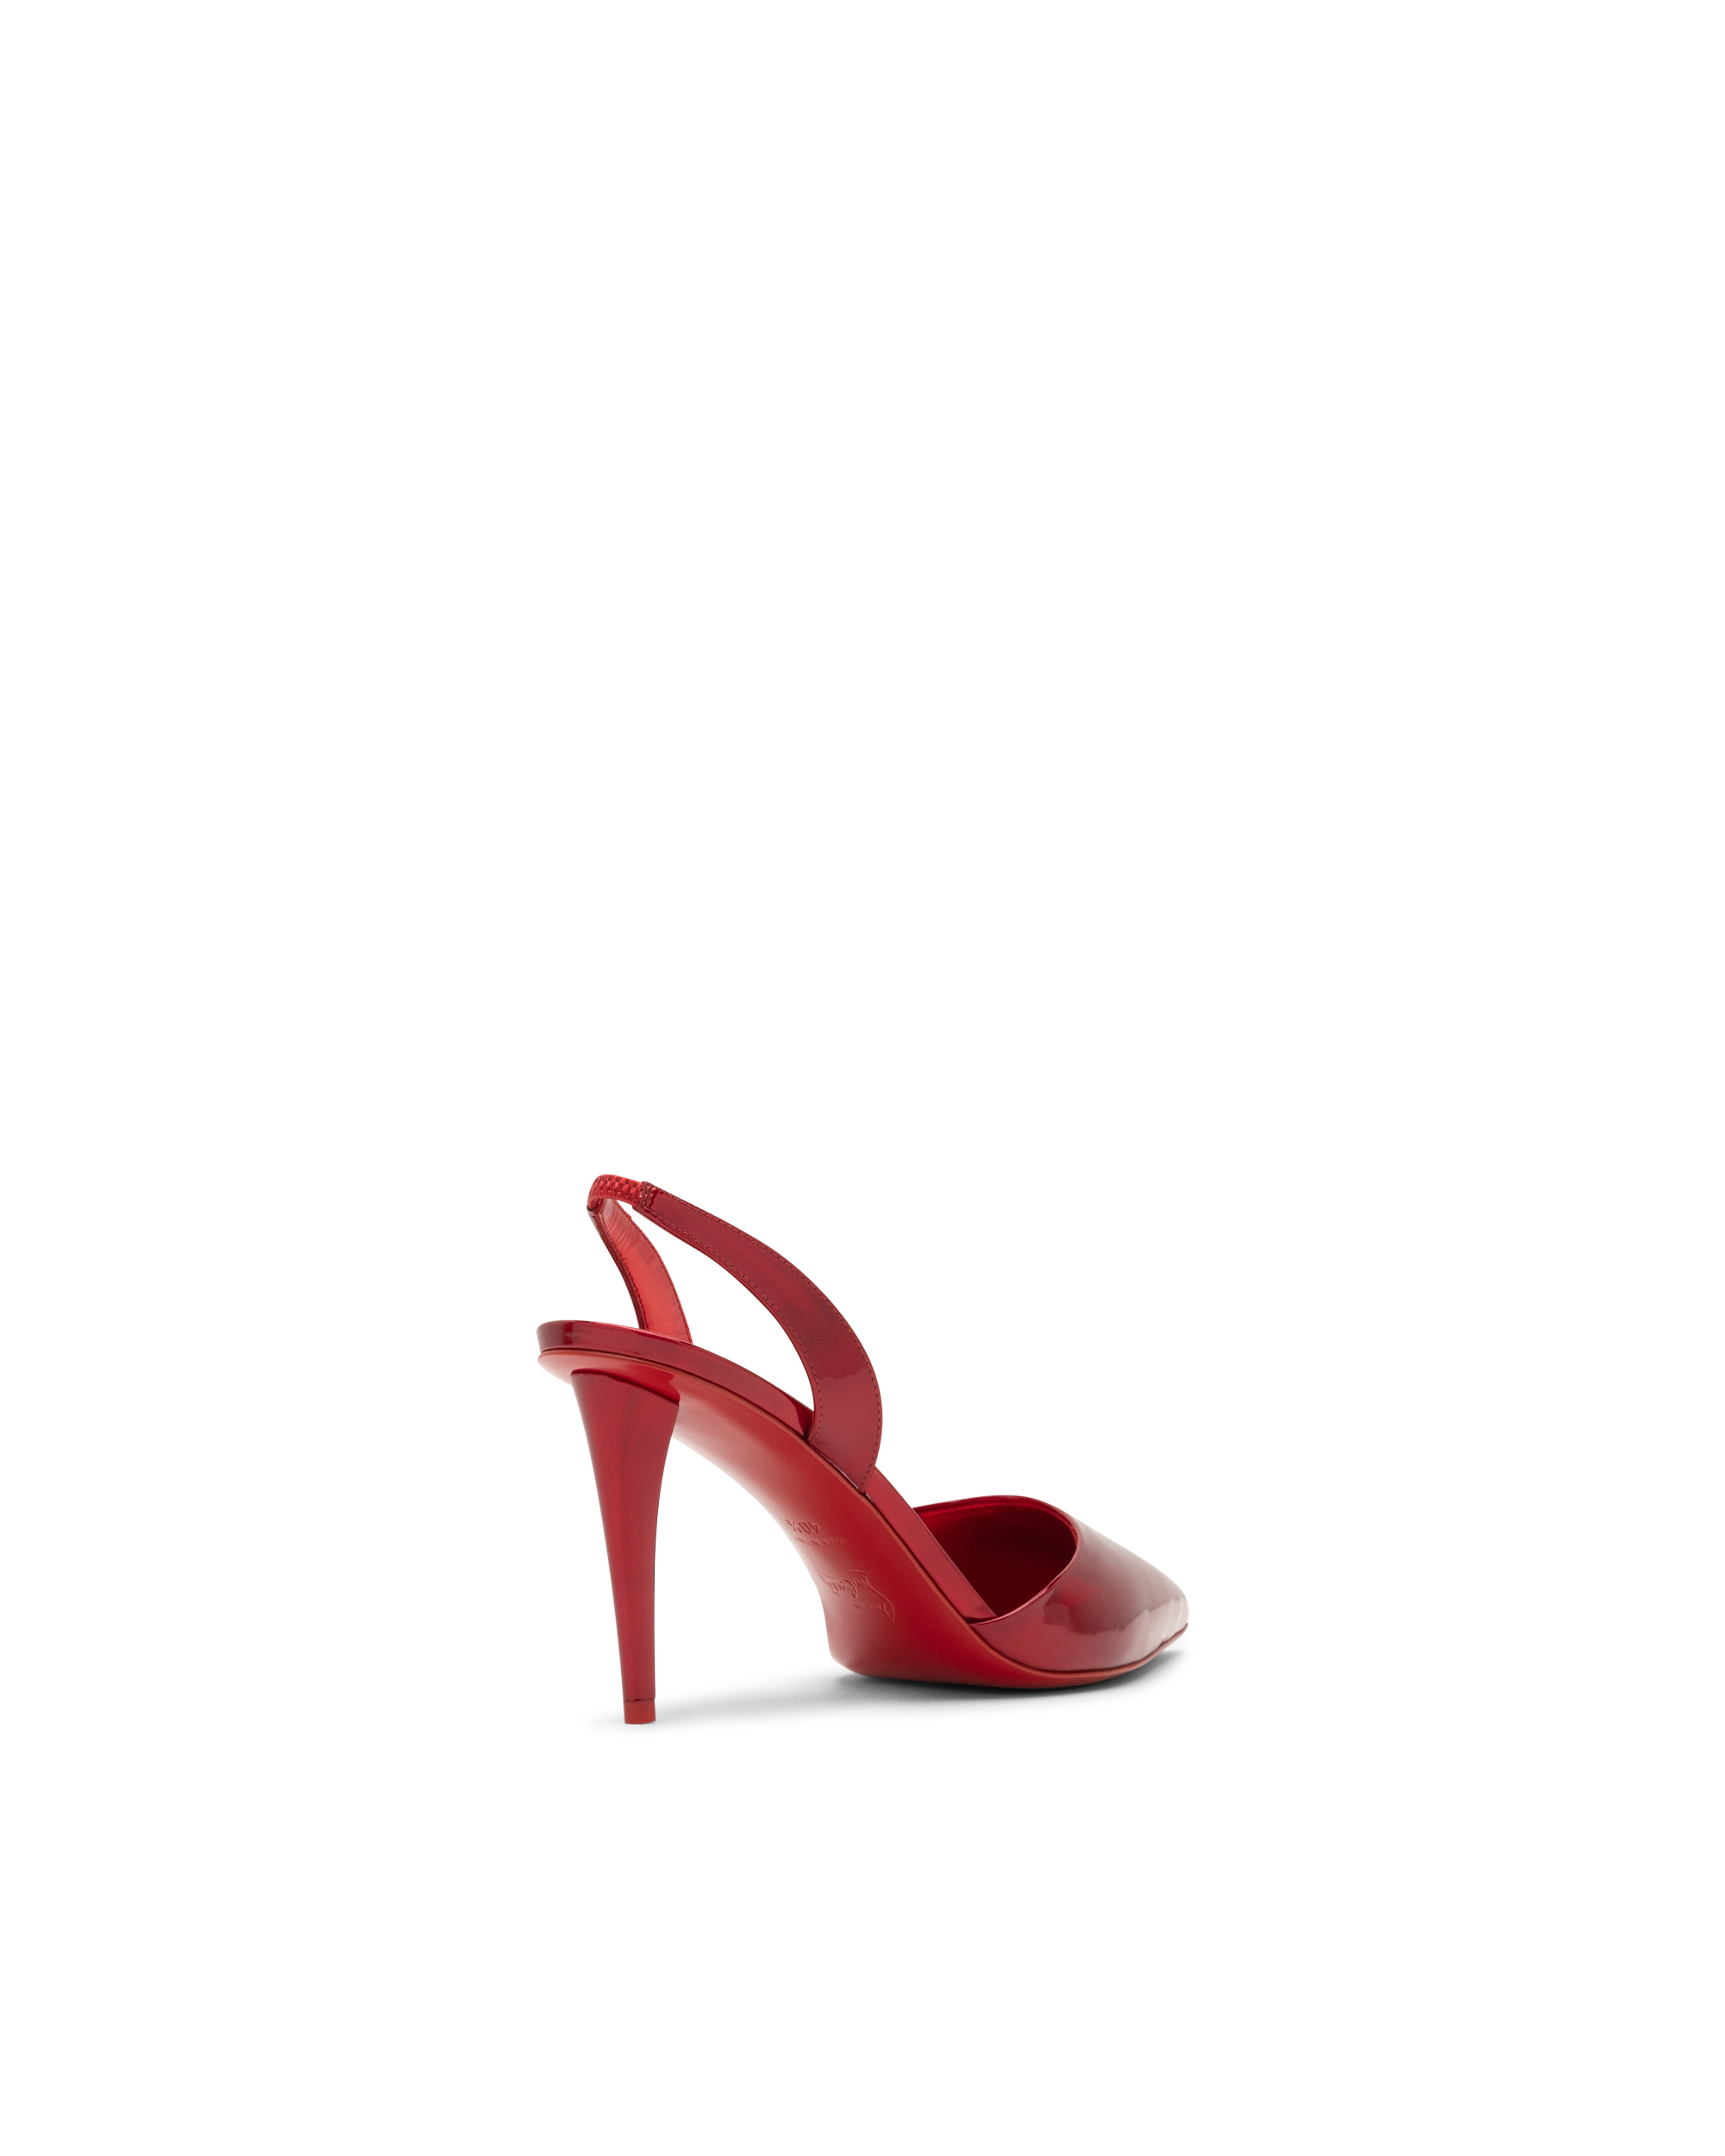 Astrid 85 Patent Leather Slingback Pumps